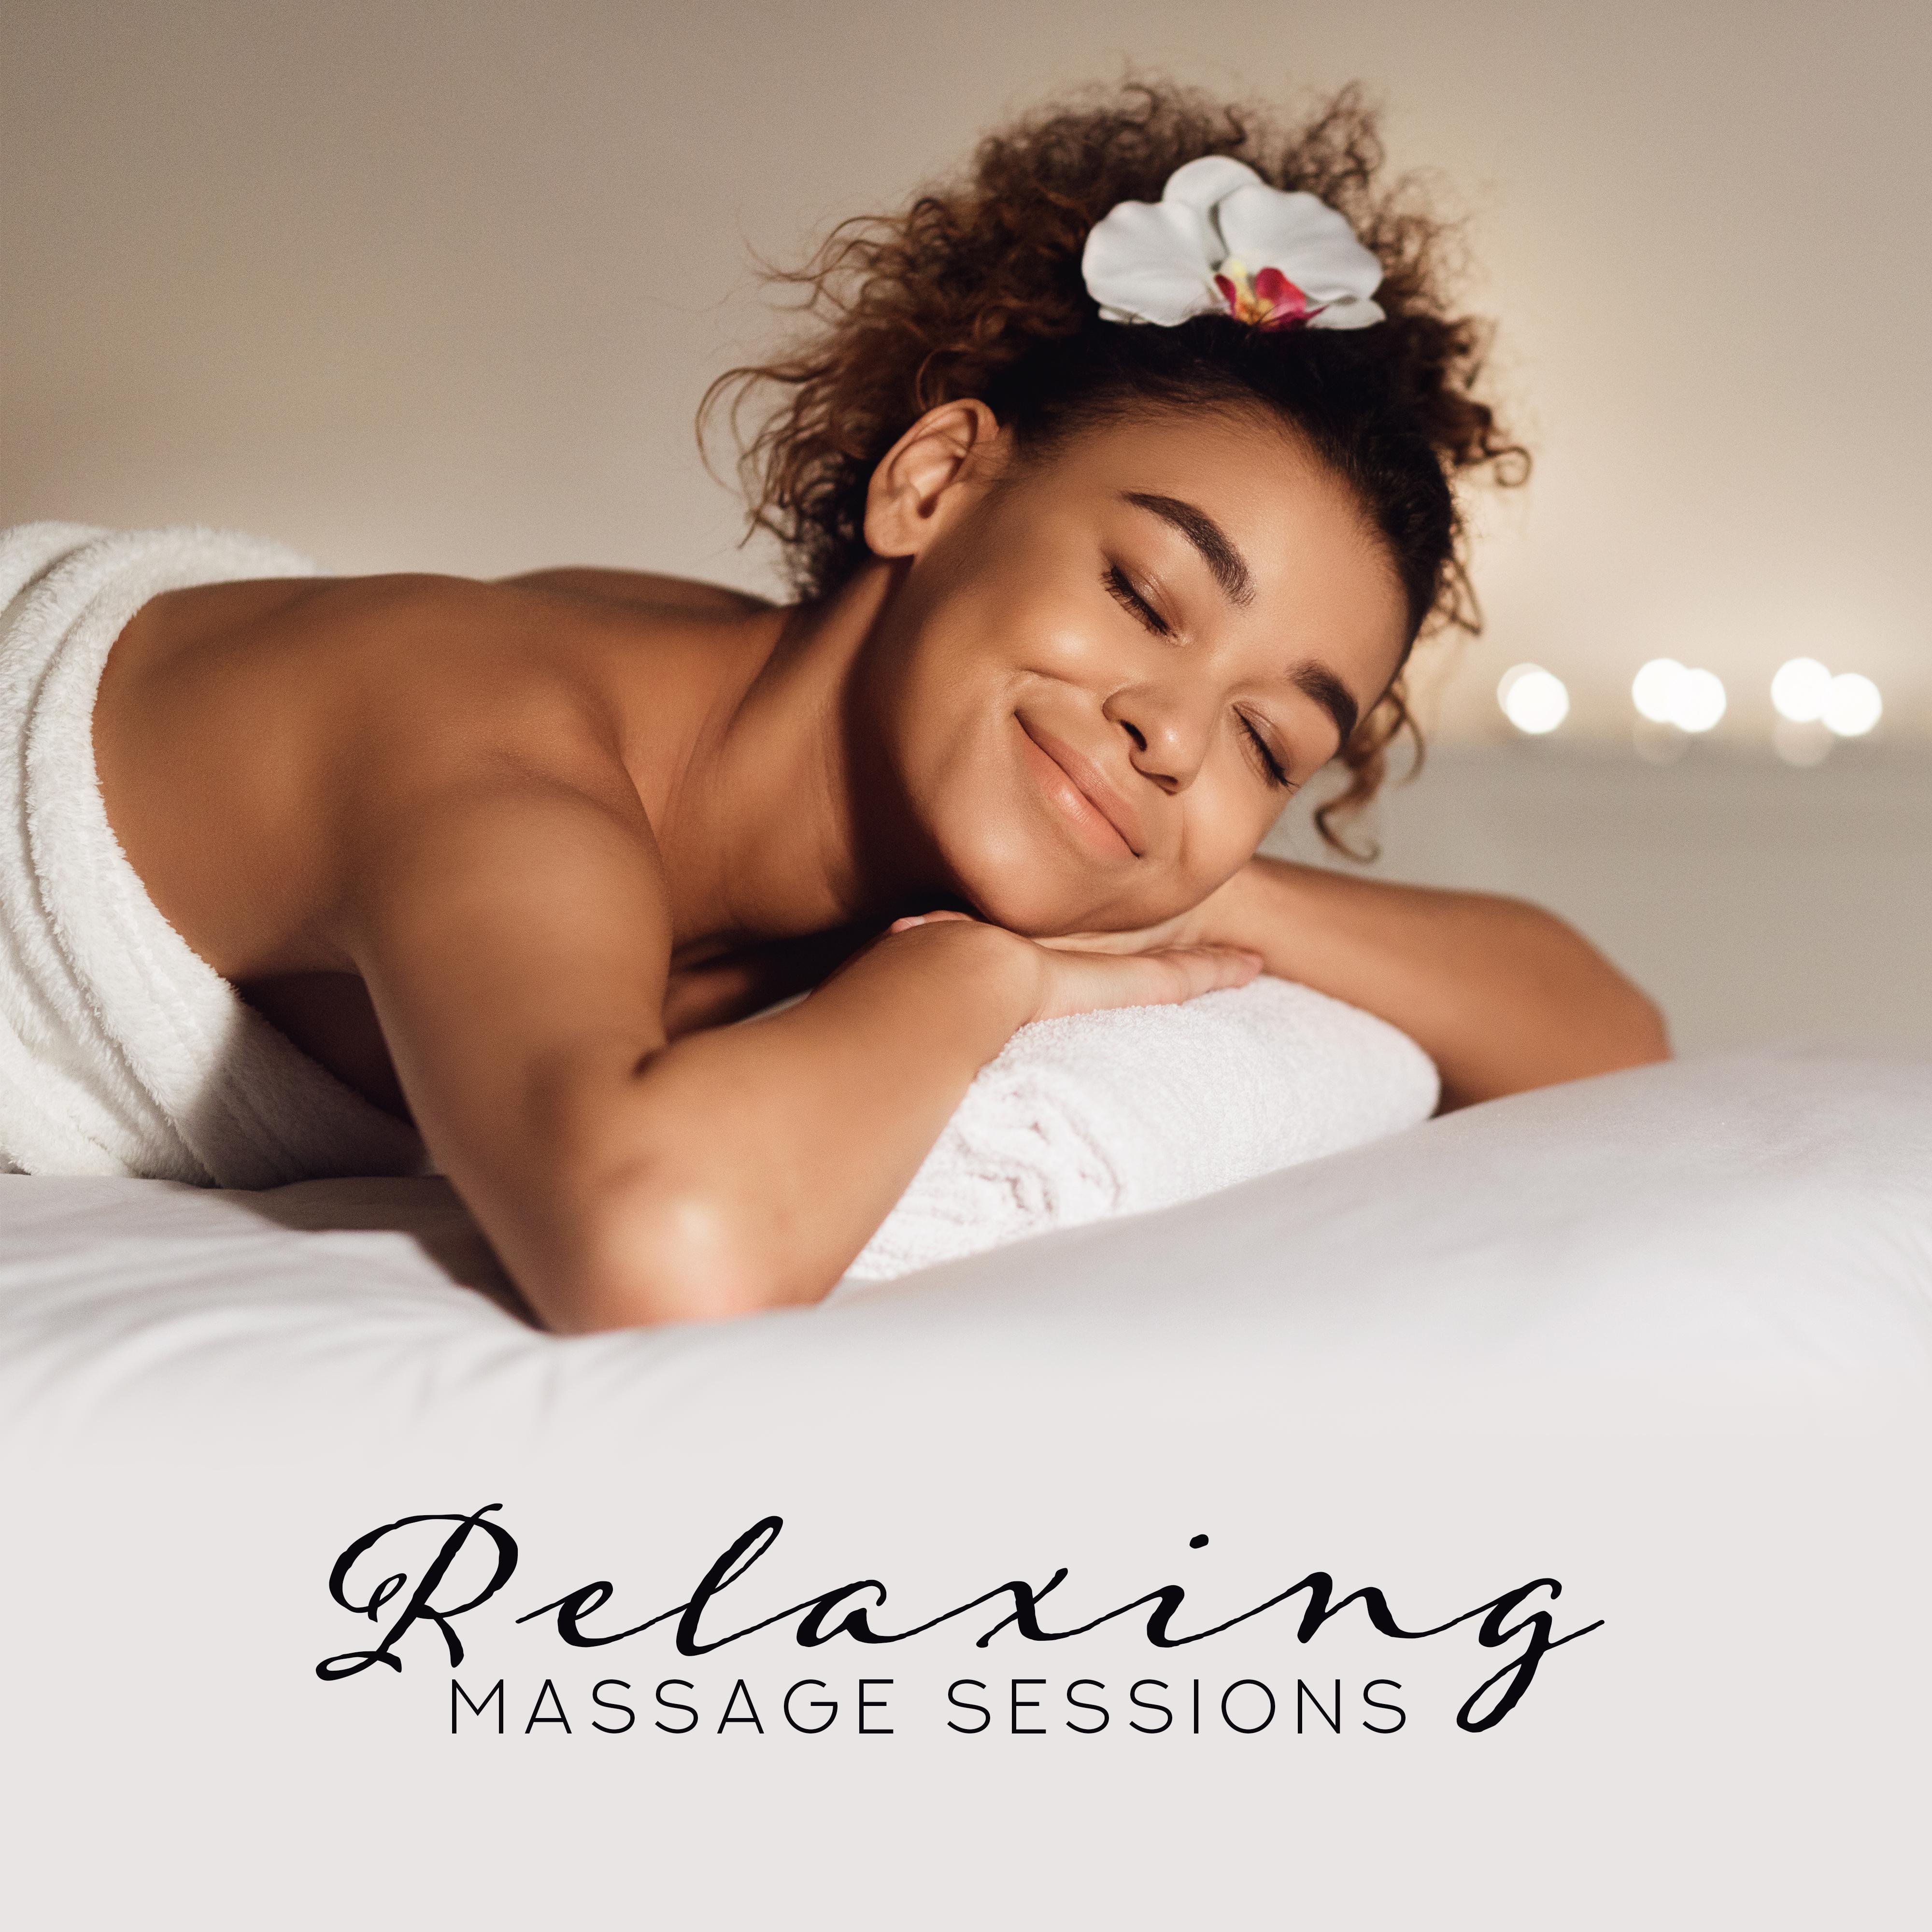 Relaxing Massage Sessions: 2019 New Age Spa & Wellness Music, Ambient & Nature Sounds for Perfect Relax, Massage Songs